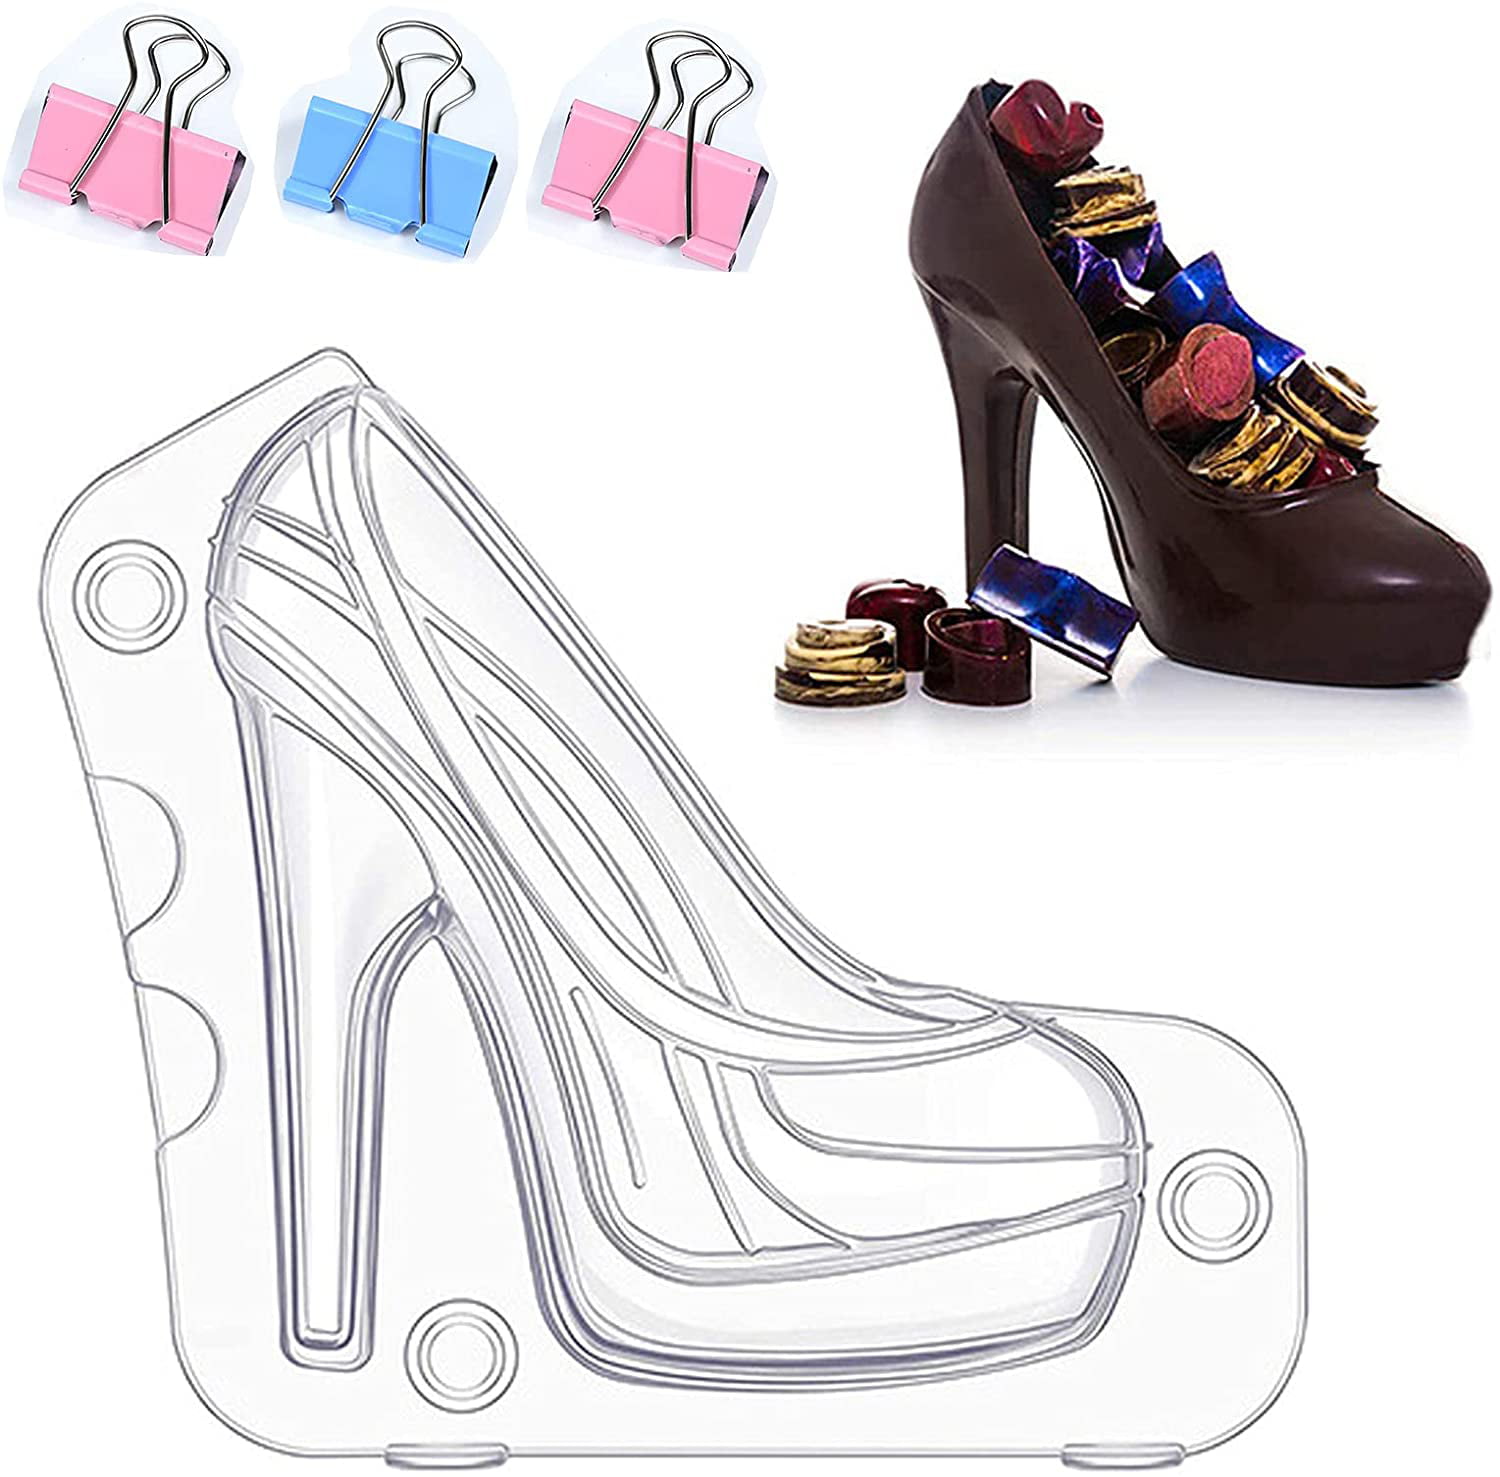 1X DIY 3D High Heel Shoe Candy Mold Chocolate Jelly Mould Cake Baking Tool Decor 